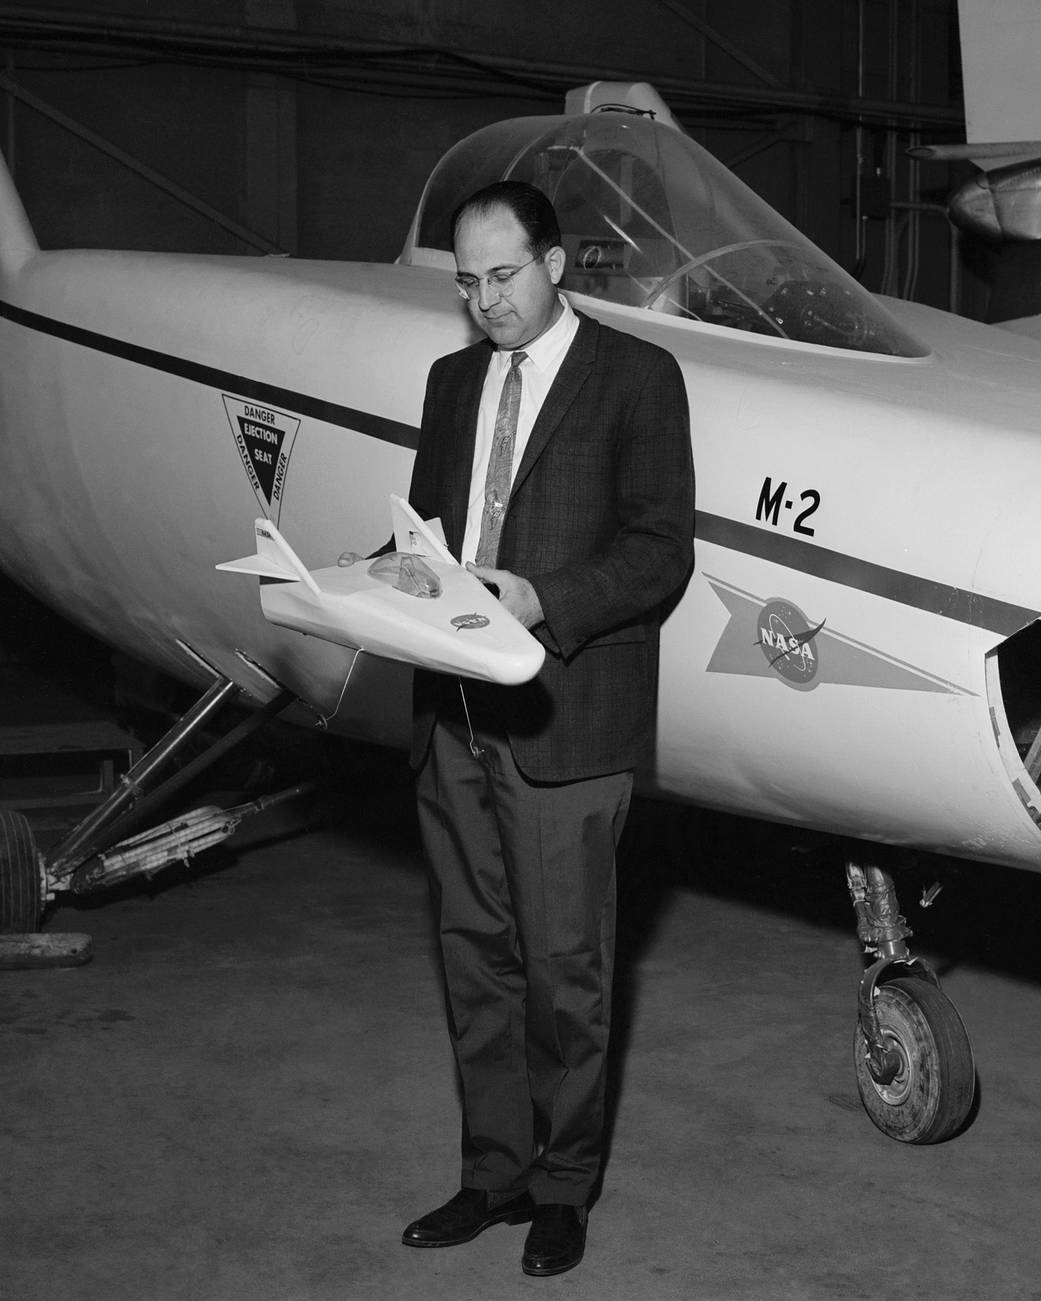 Dale Reed with a Model of the M2-F1 and the Actual M2-F1 Lifting Body